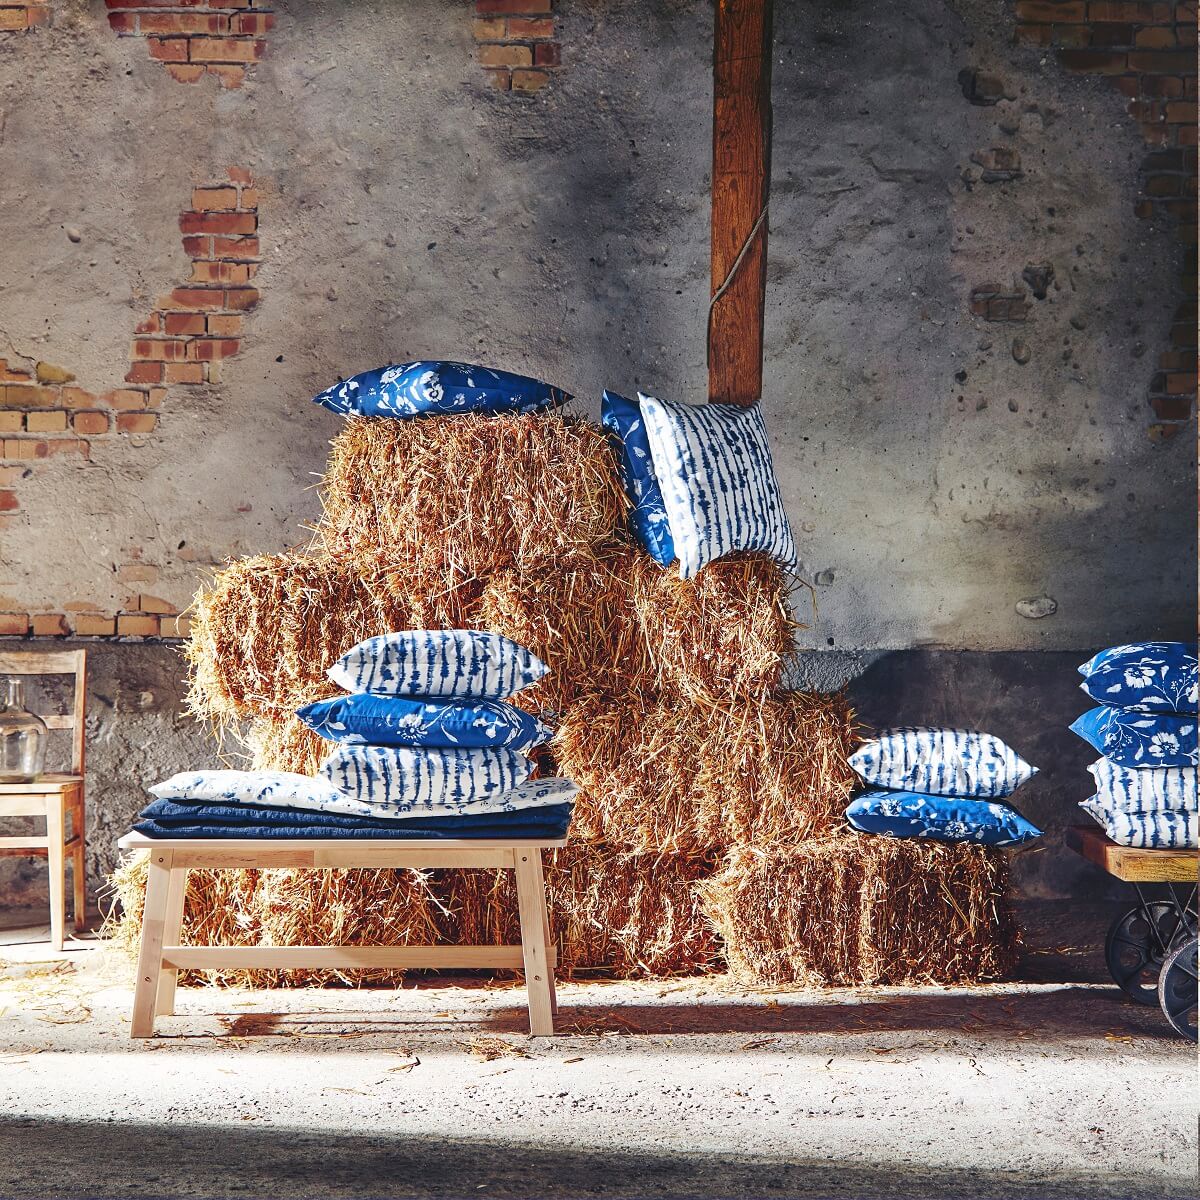 ikea sustainable slow living nordroom9 IKEA's New Product Launch Embraces Sustainability and Slow Living